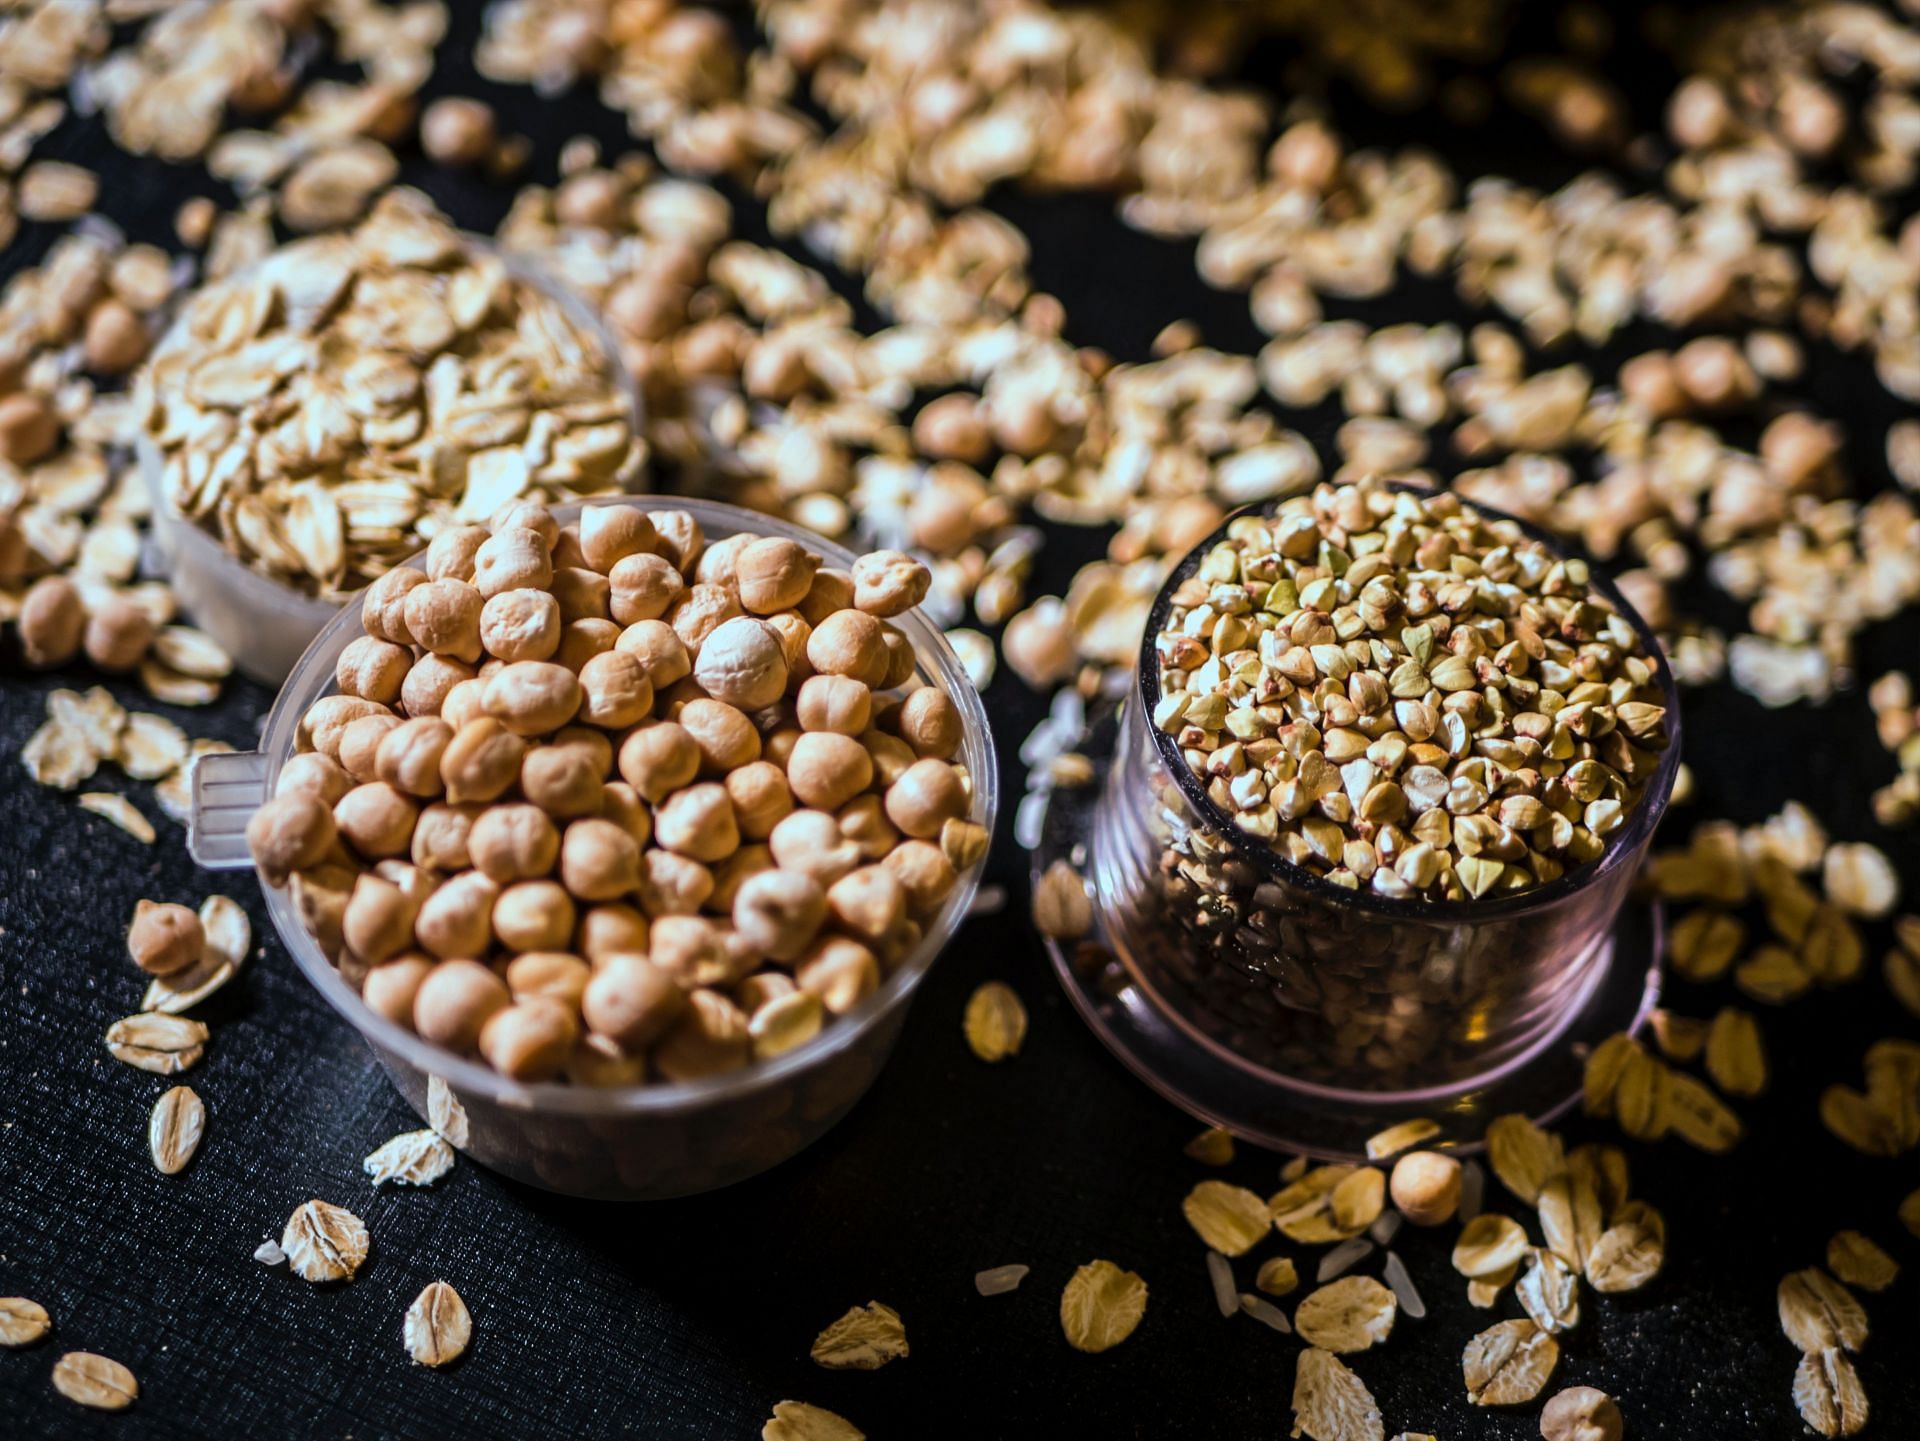 Whole grains are an excellent source of carbohydrates. (Image via Pexels/ Mike)